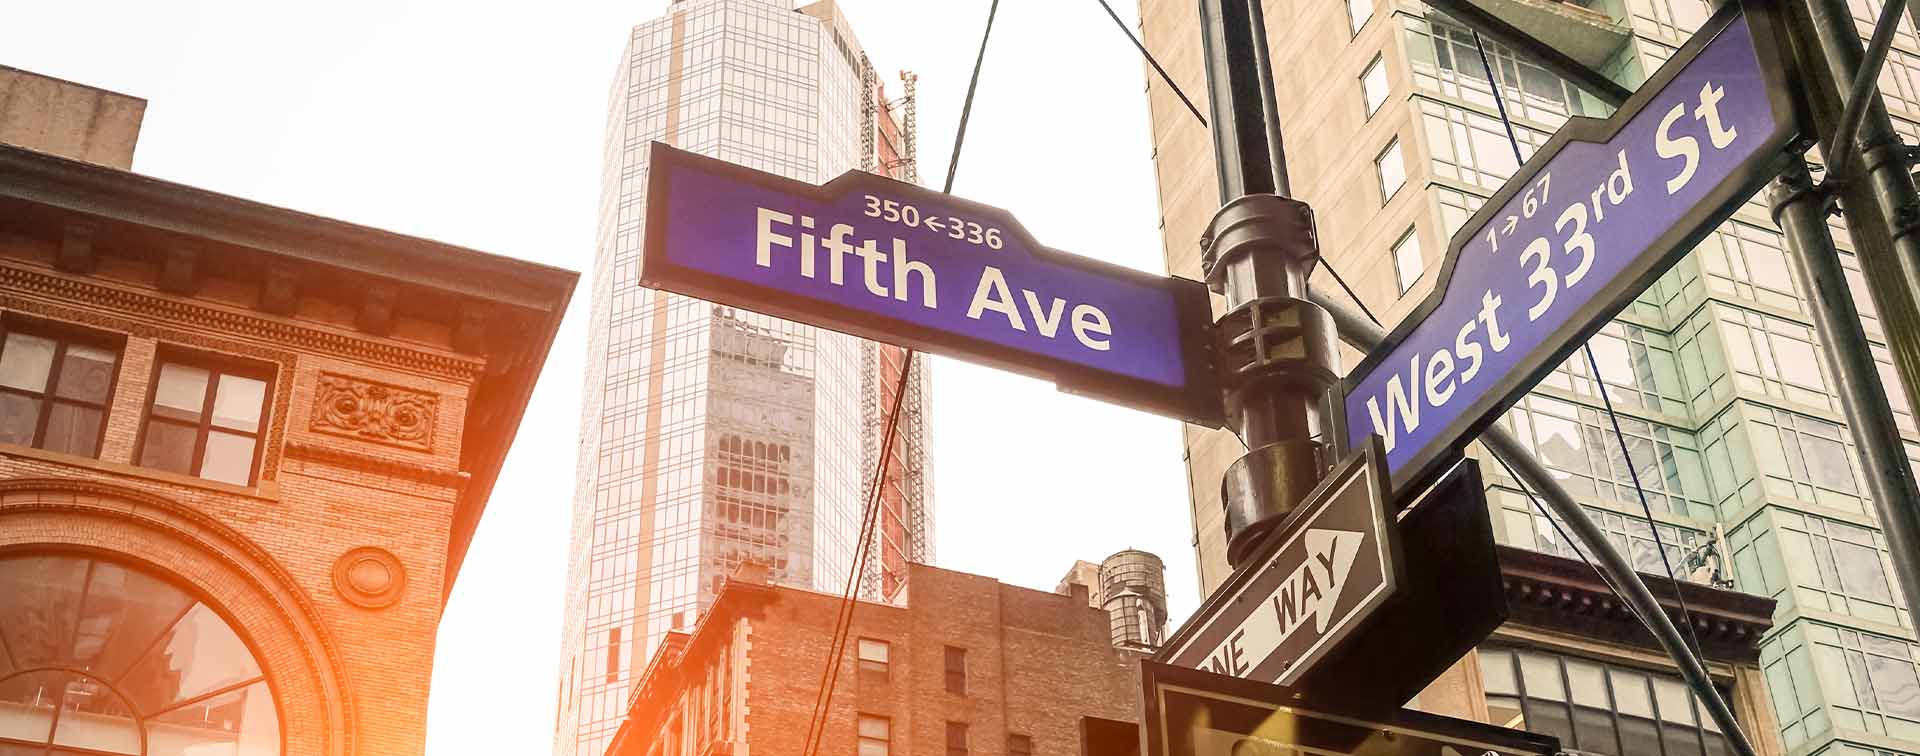 Fifth Ave and West 33rd sign in New York City at sunset